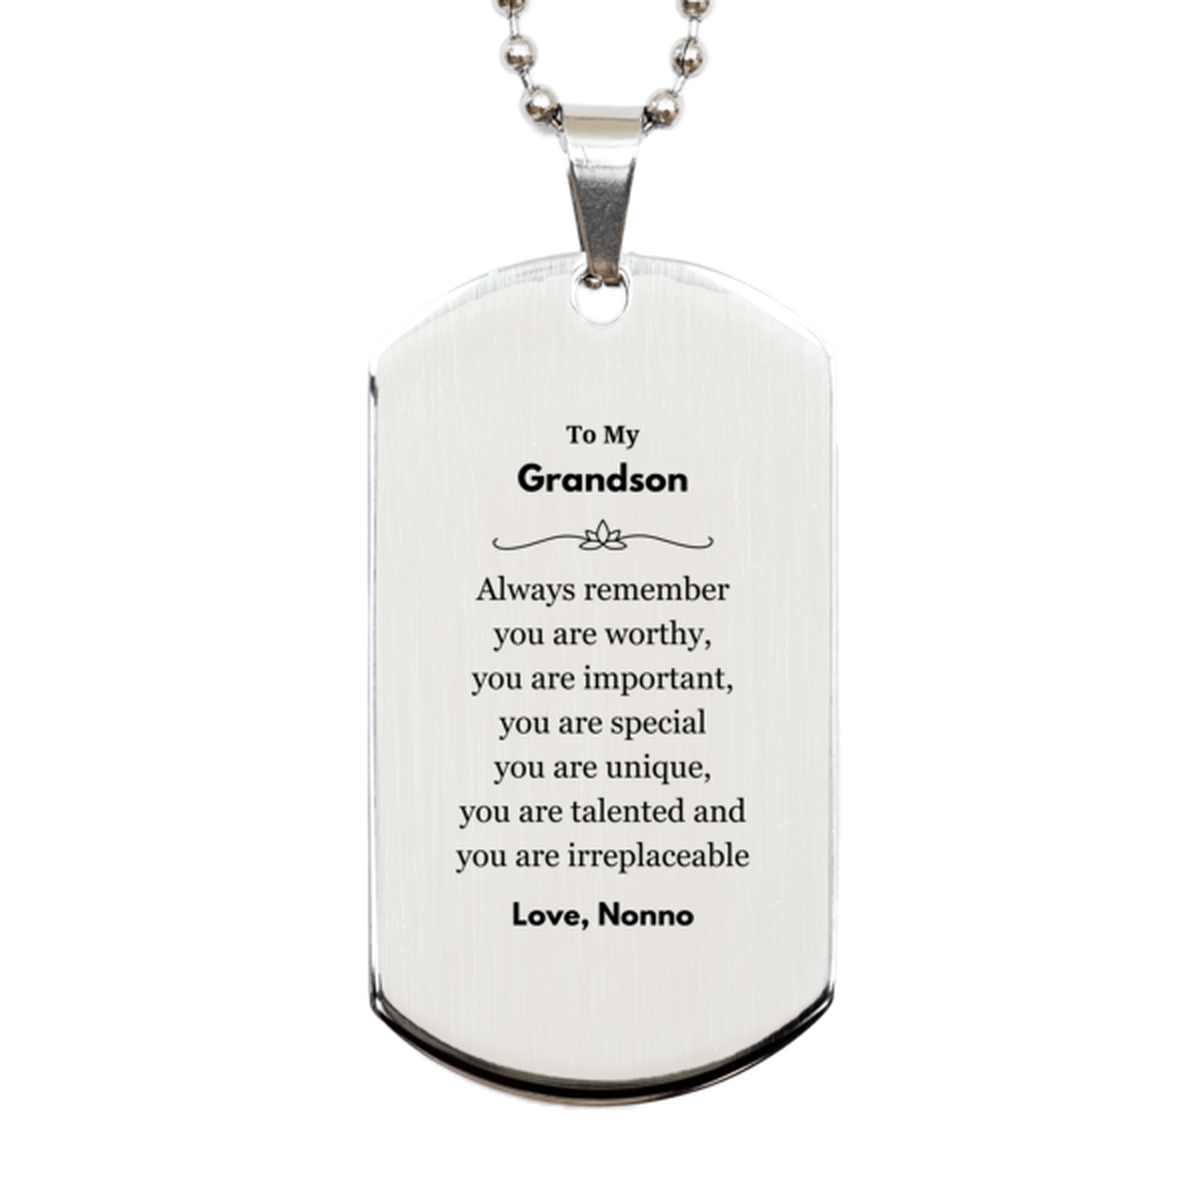 Grandson Birthday Gifts from Nonno, Inspirational Silver Dog Tag for Grandson Christmas Graduation Gifts for Grandson Always remember you are worthy, you are important. Love, Nonno